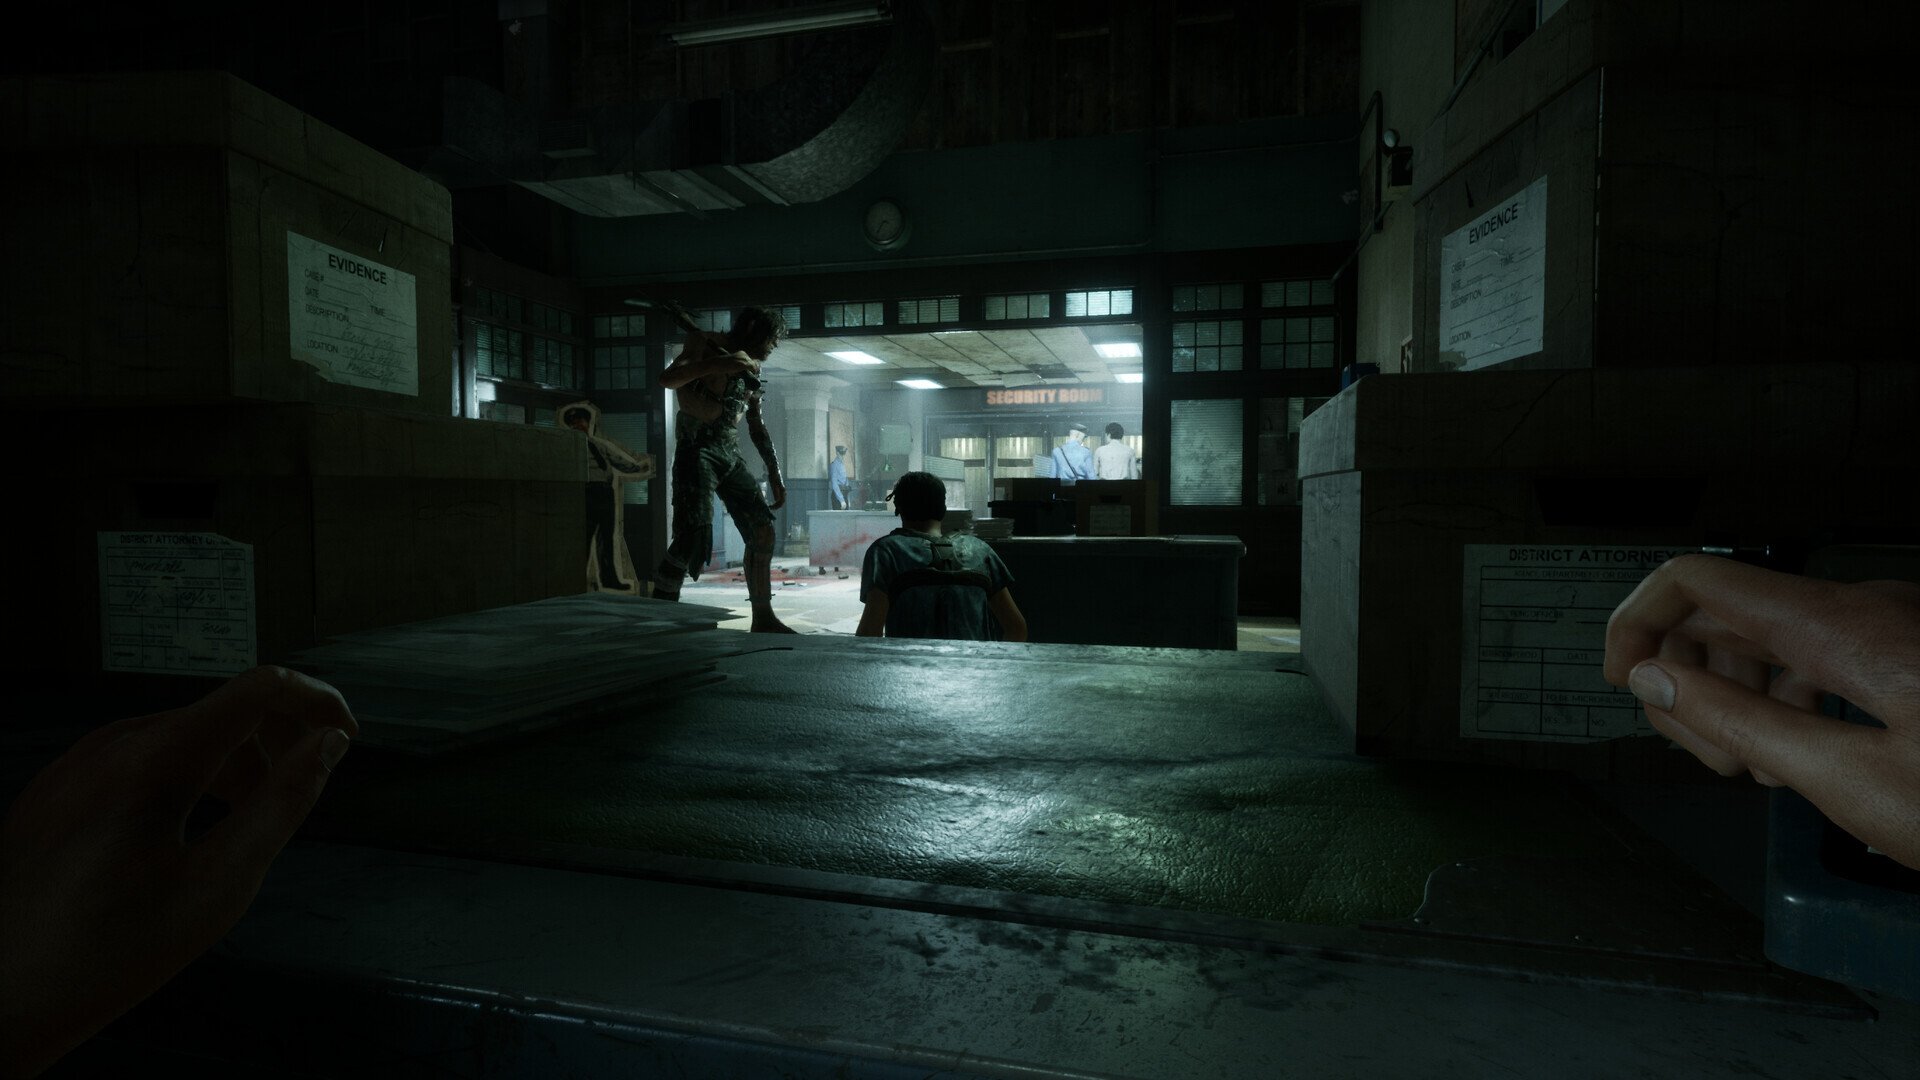 The Outlast Trials Gets New Gameplay Trailer at Gamescom